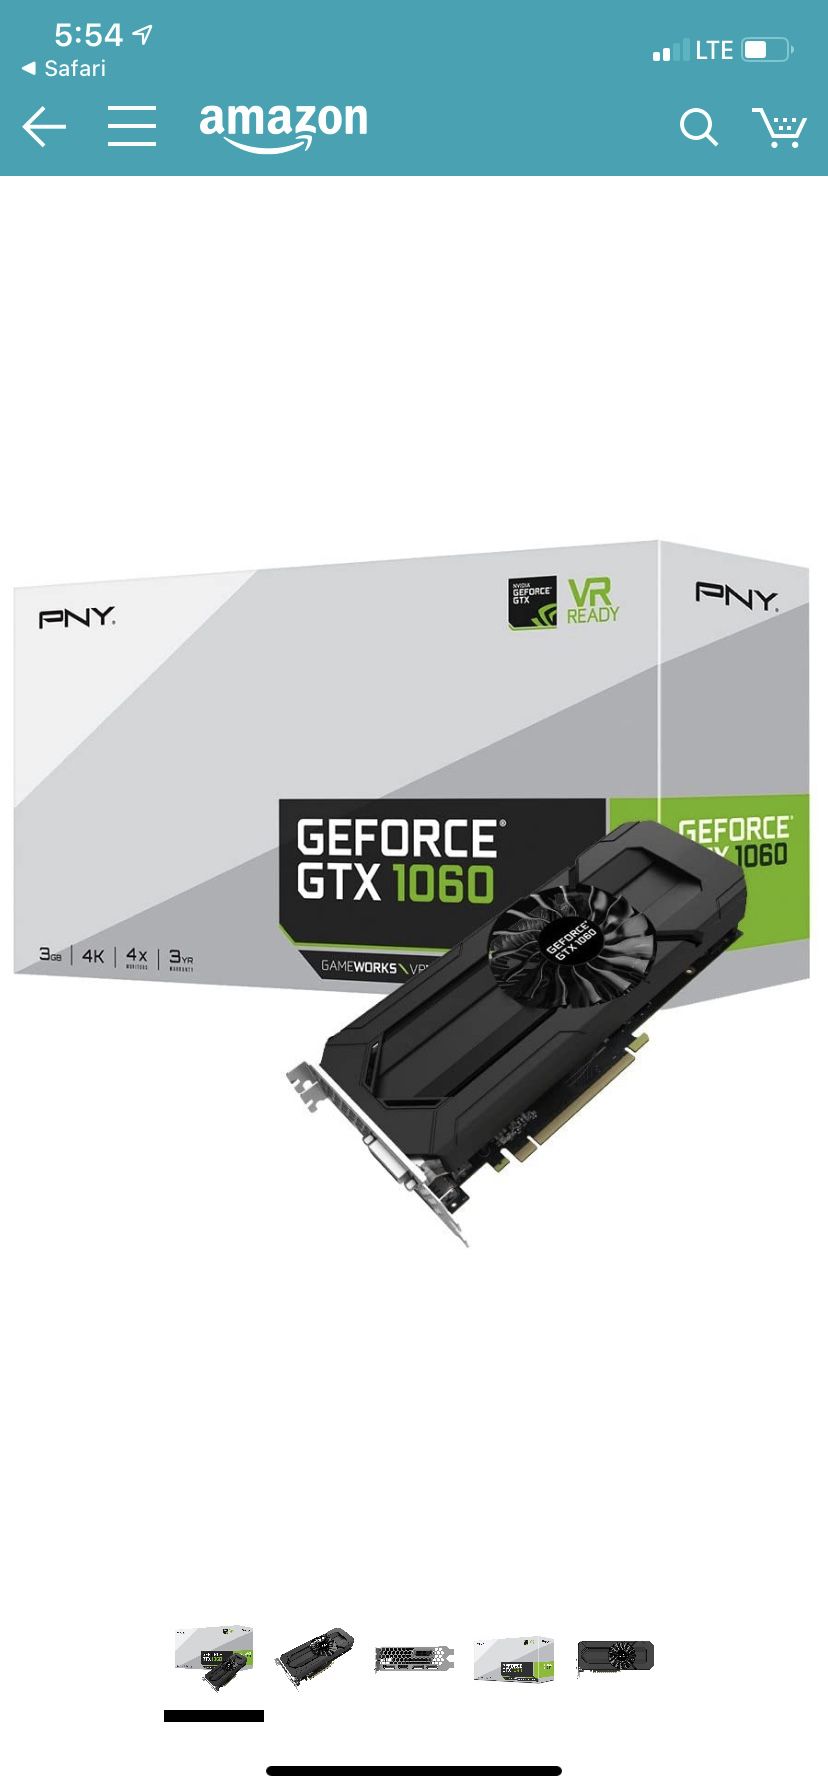 PNY GE FORCE GTX 1060 graphics card